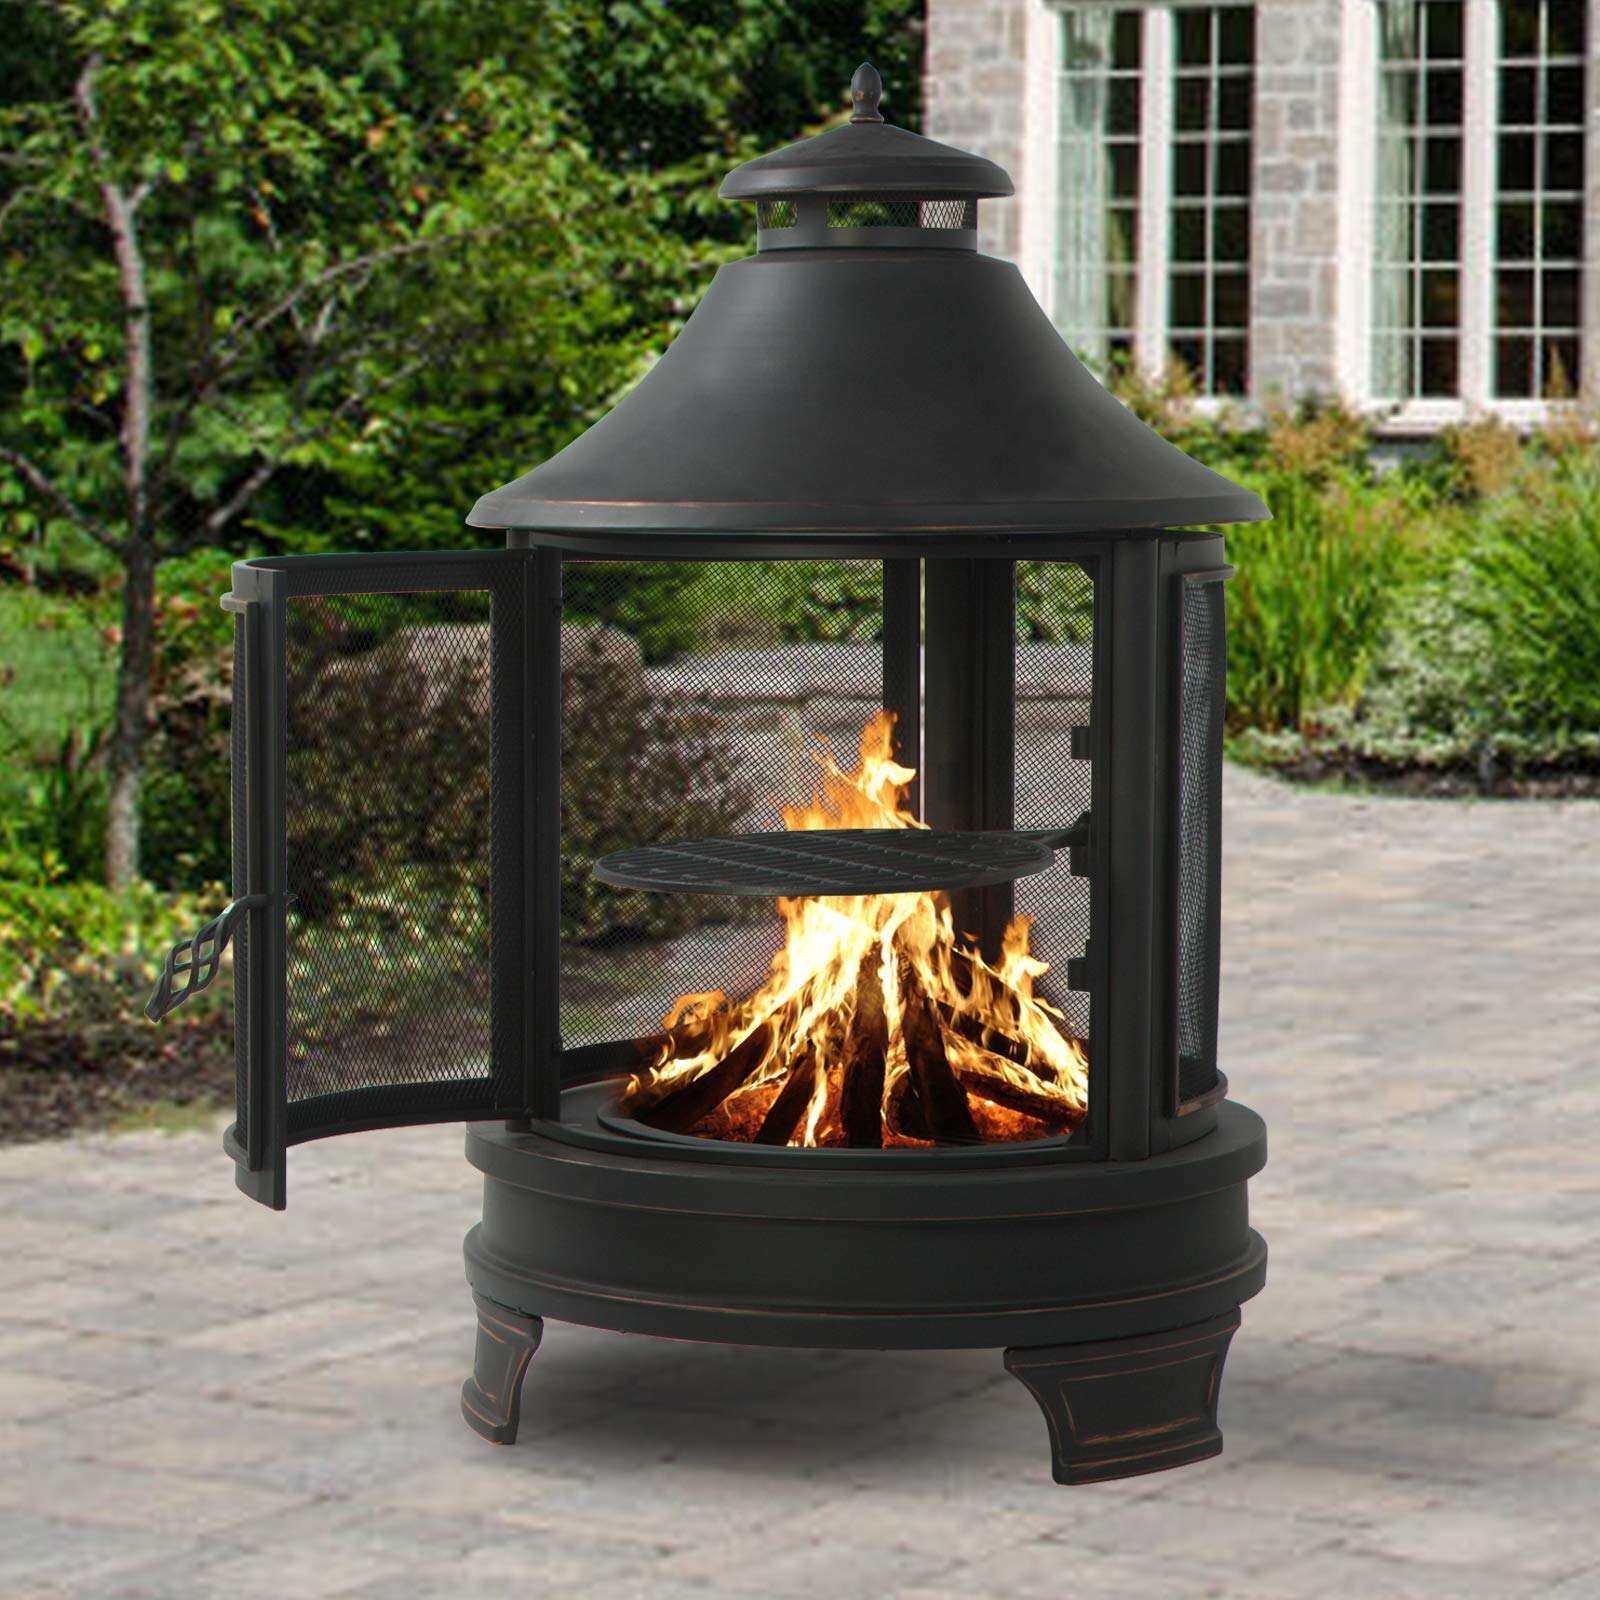 Garden BBQ Fireplace Stove factory, wholesale Garden BBQ Fireplace Stove